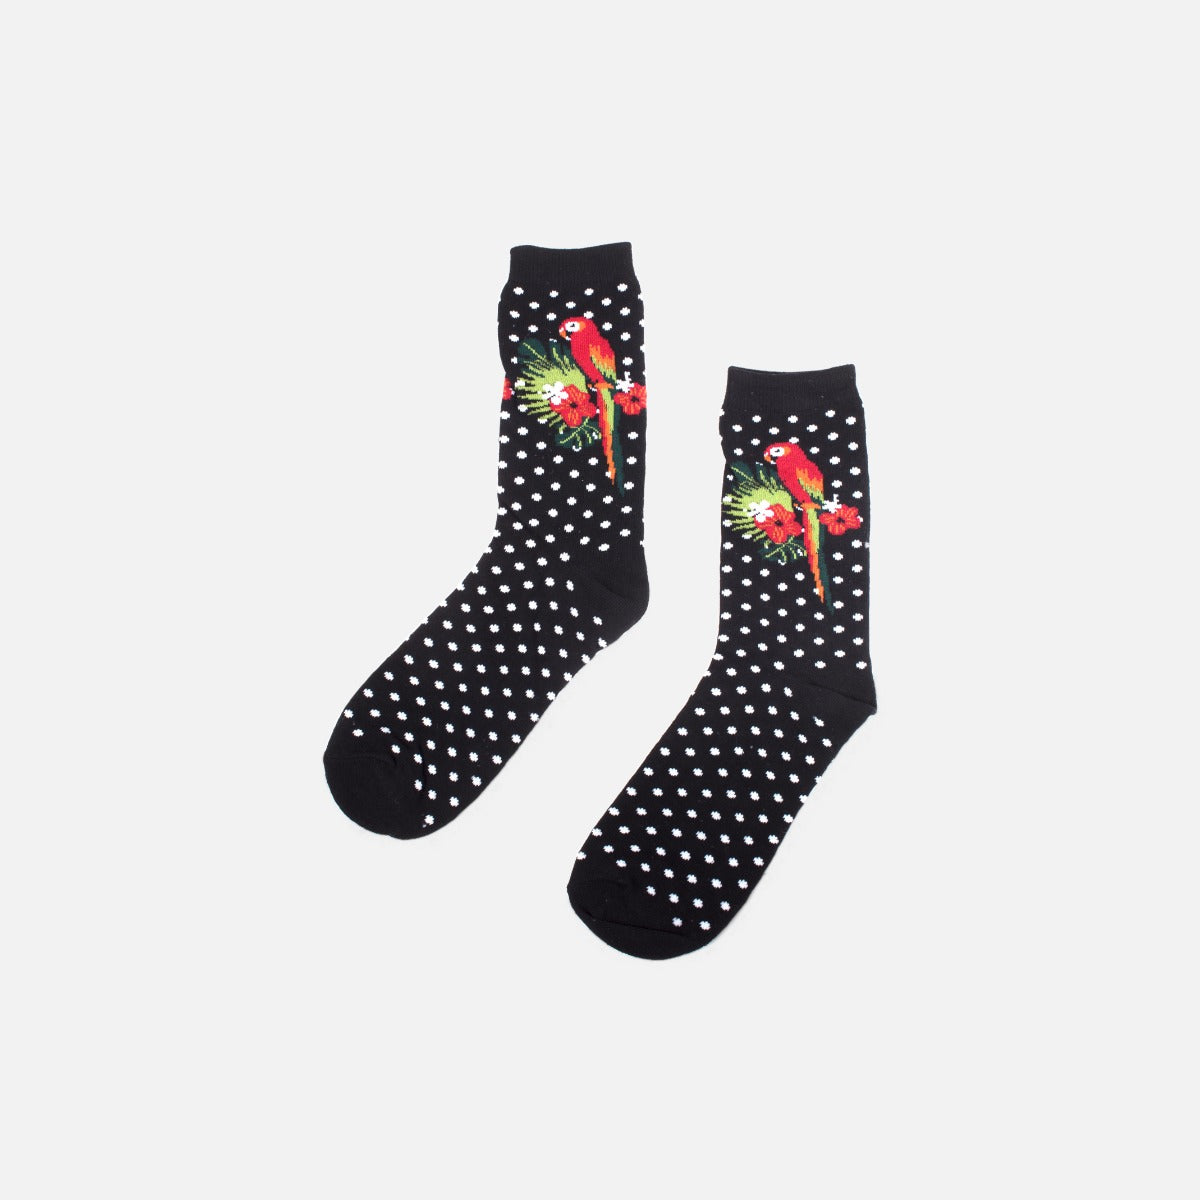 Black socks with white dots and parrot